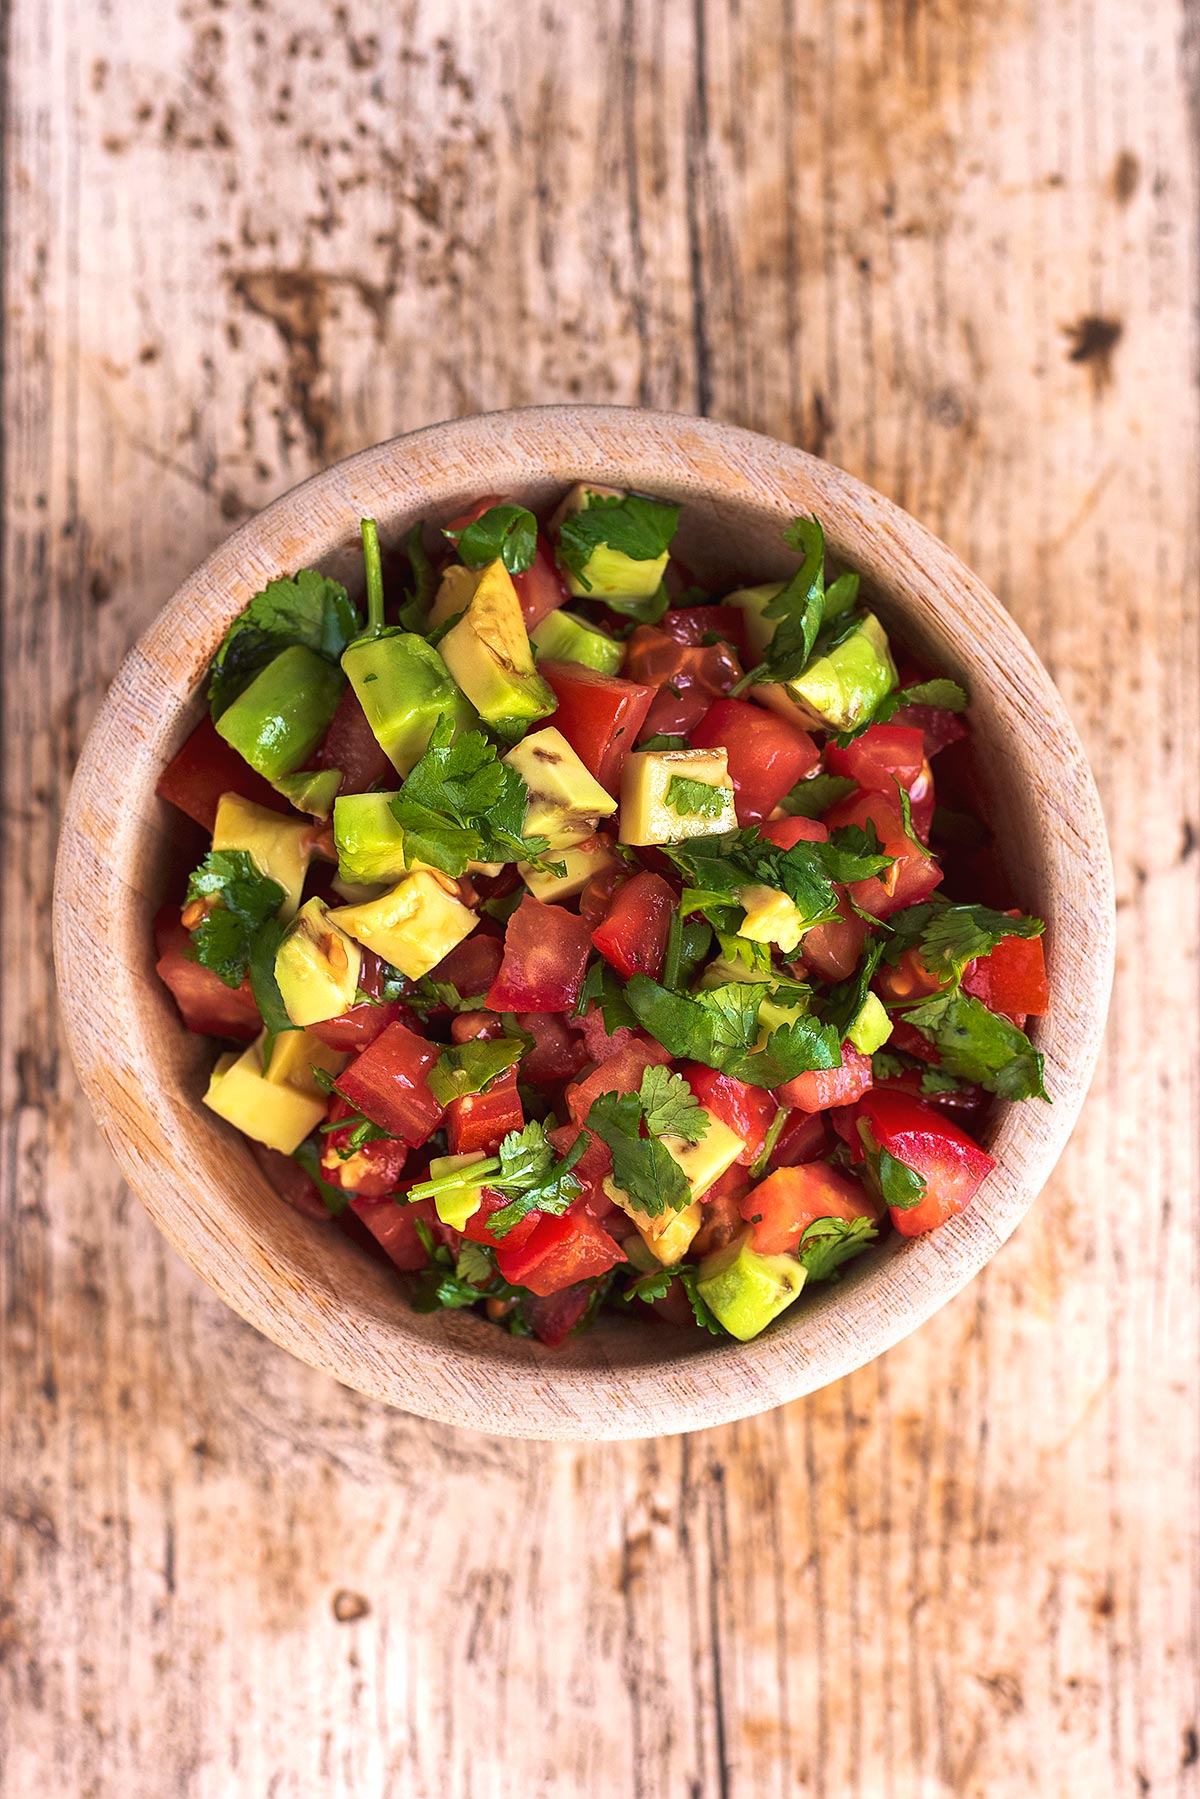 A small wooden bowl containing chopped tomato and avocado salsa.